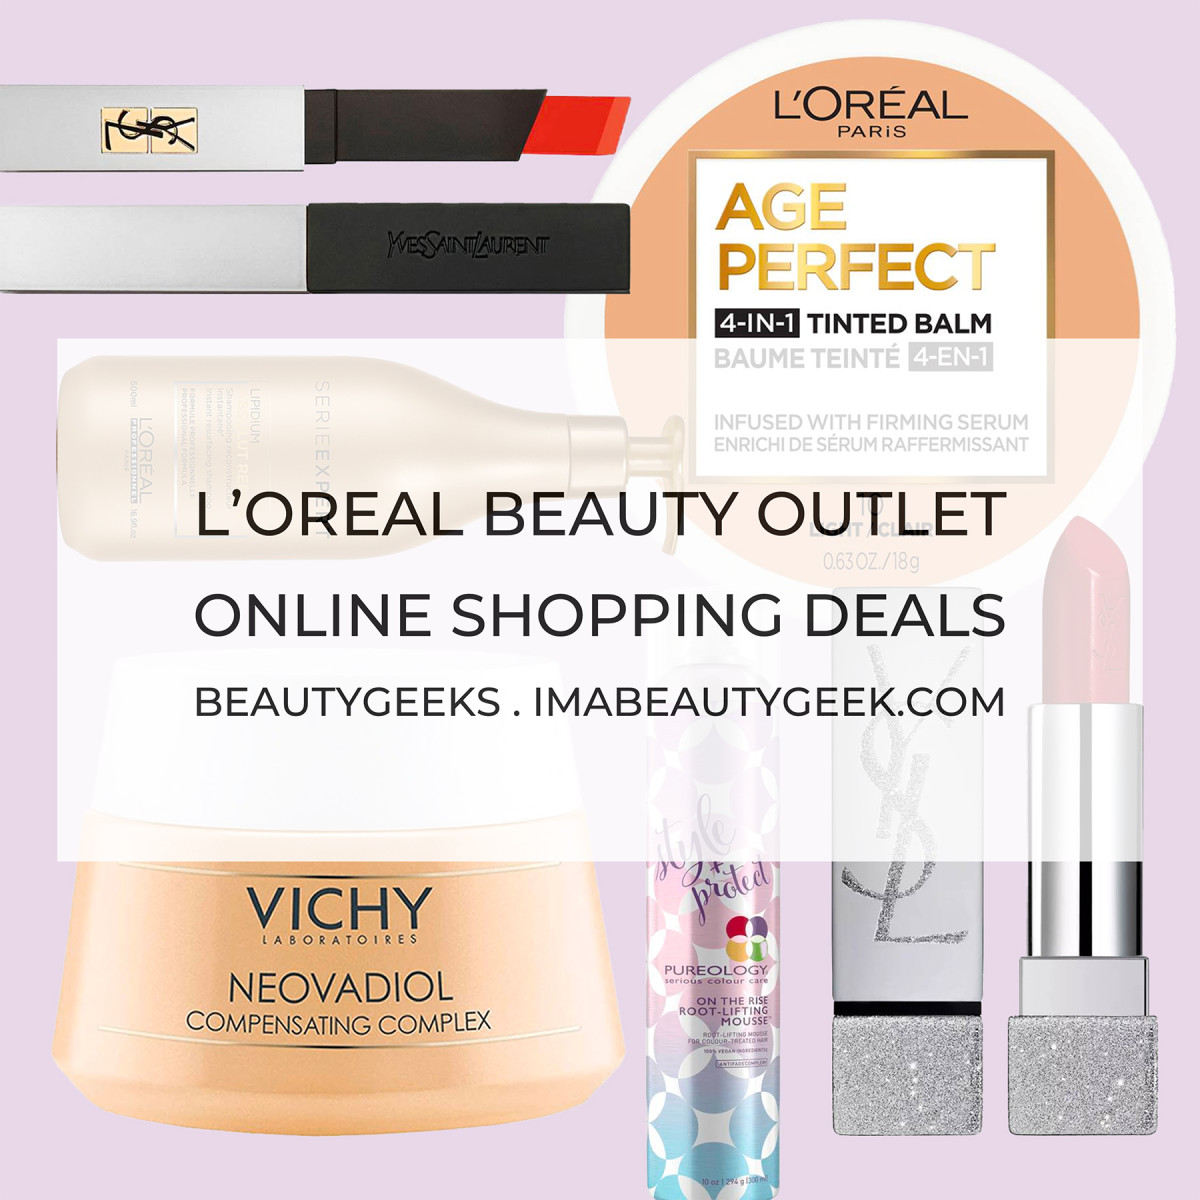 L'Oreal Beauty Outlet warehouse sale online